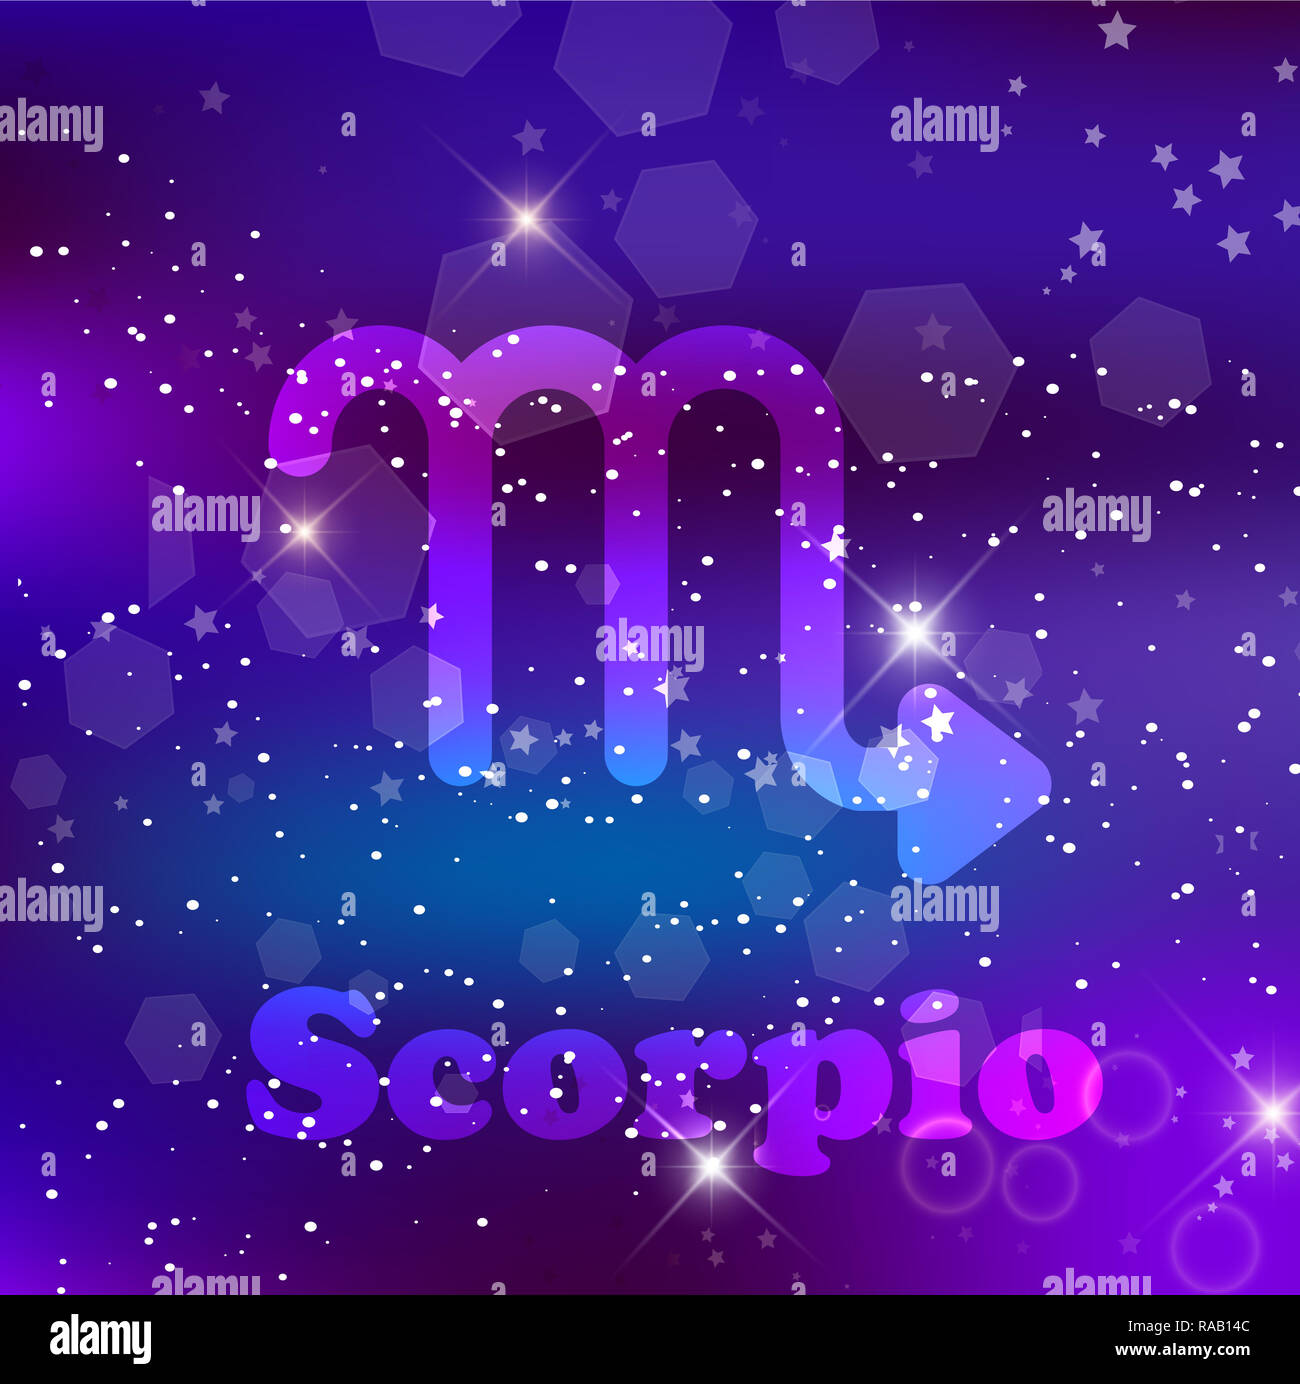 Scorpio Zodiac sign and constellation on a cosmic purple background with glowing stars and nebula.   illustration, banner, poster, card. Space, astrol Stock Photo